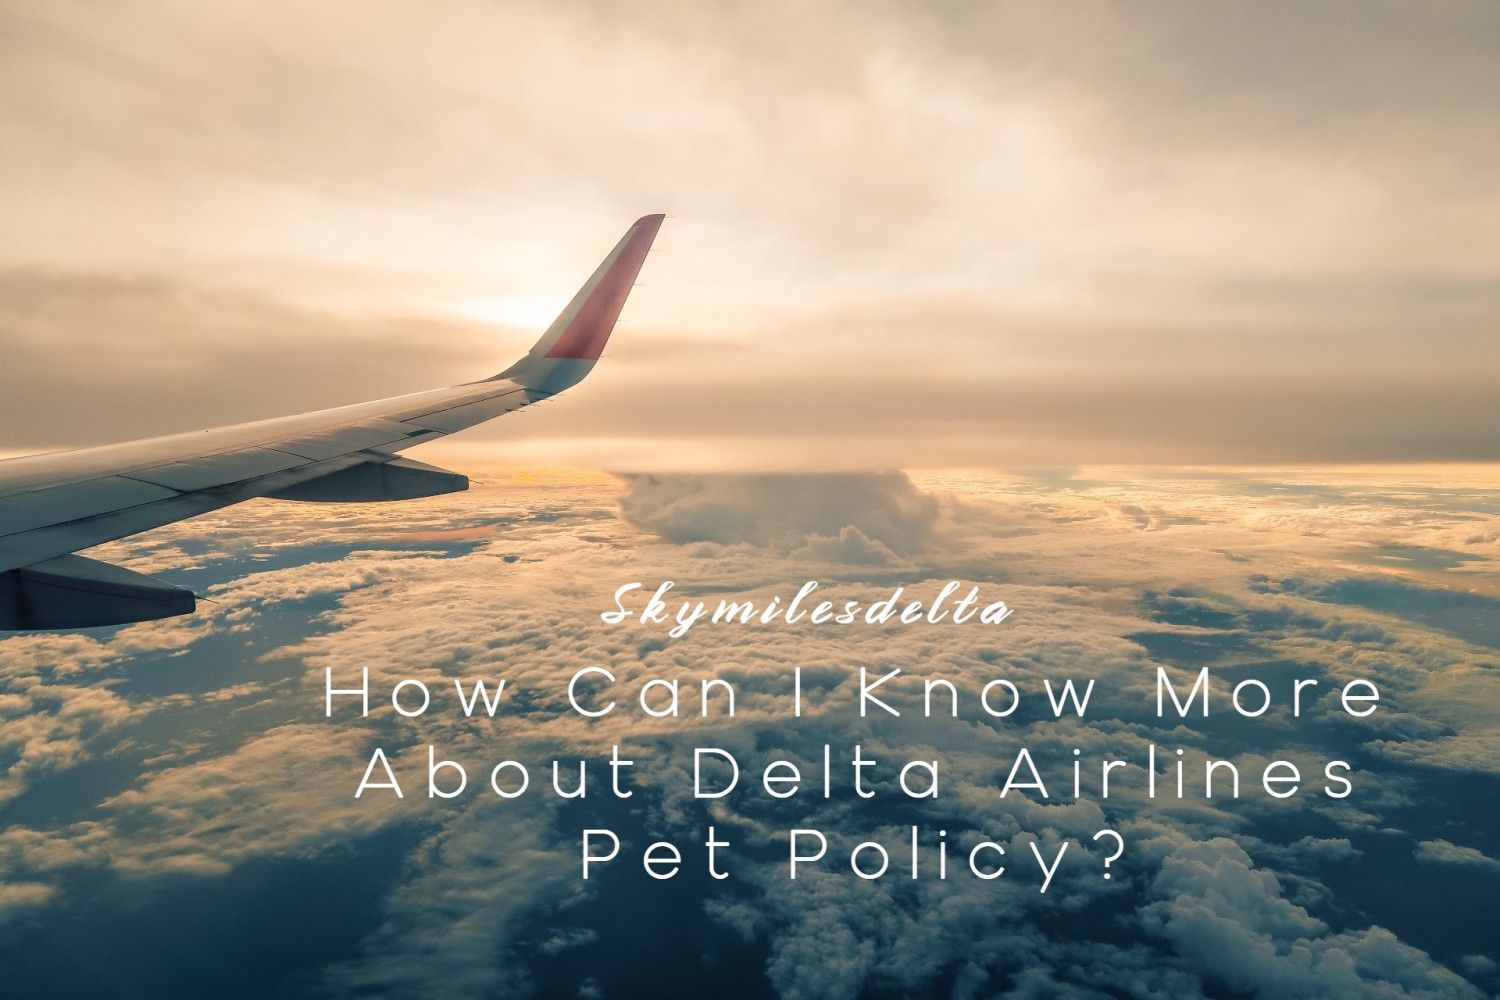 How Can I Know More About Delta Airlines Pet Policy?